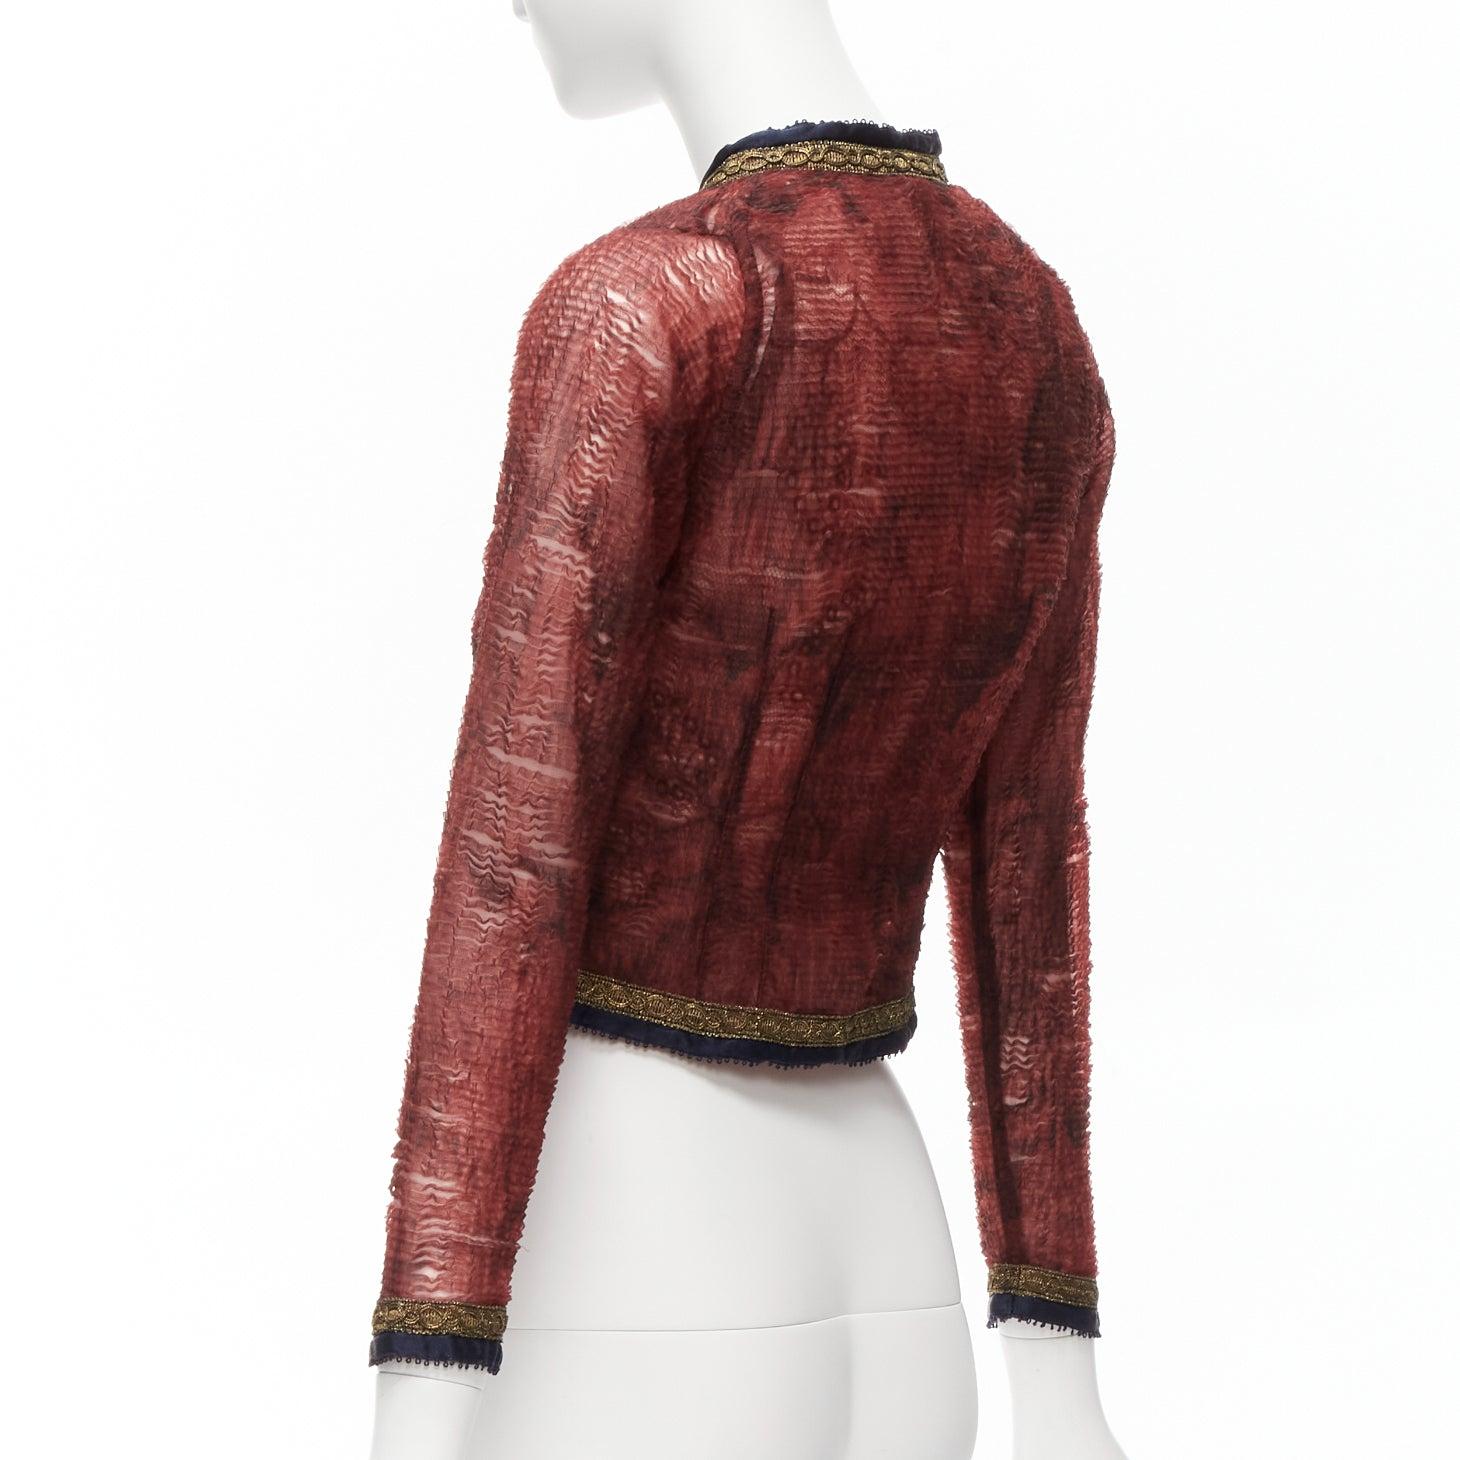 VOYAGE INVEST IN THE ORIGINAL LONDON sheer gold satin lace trim cropped jacket For Sale 2